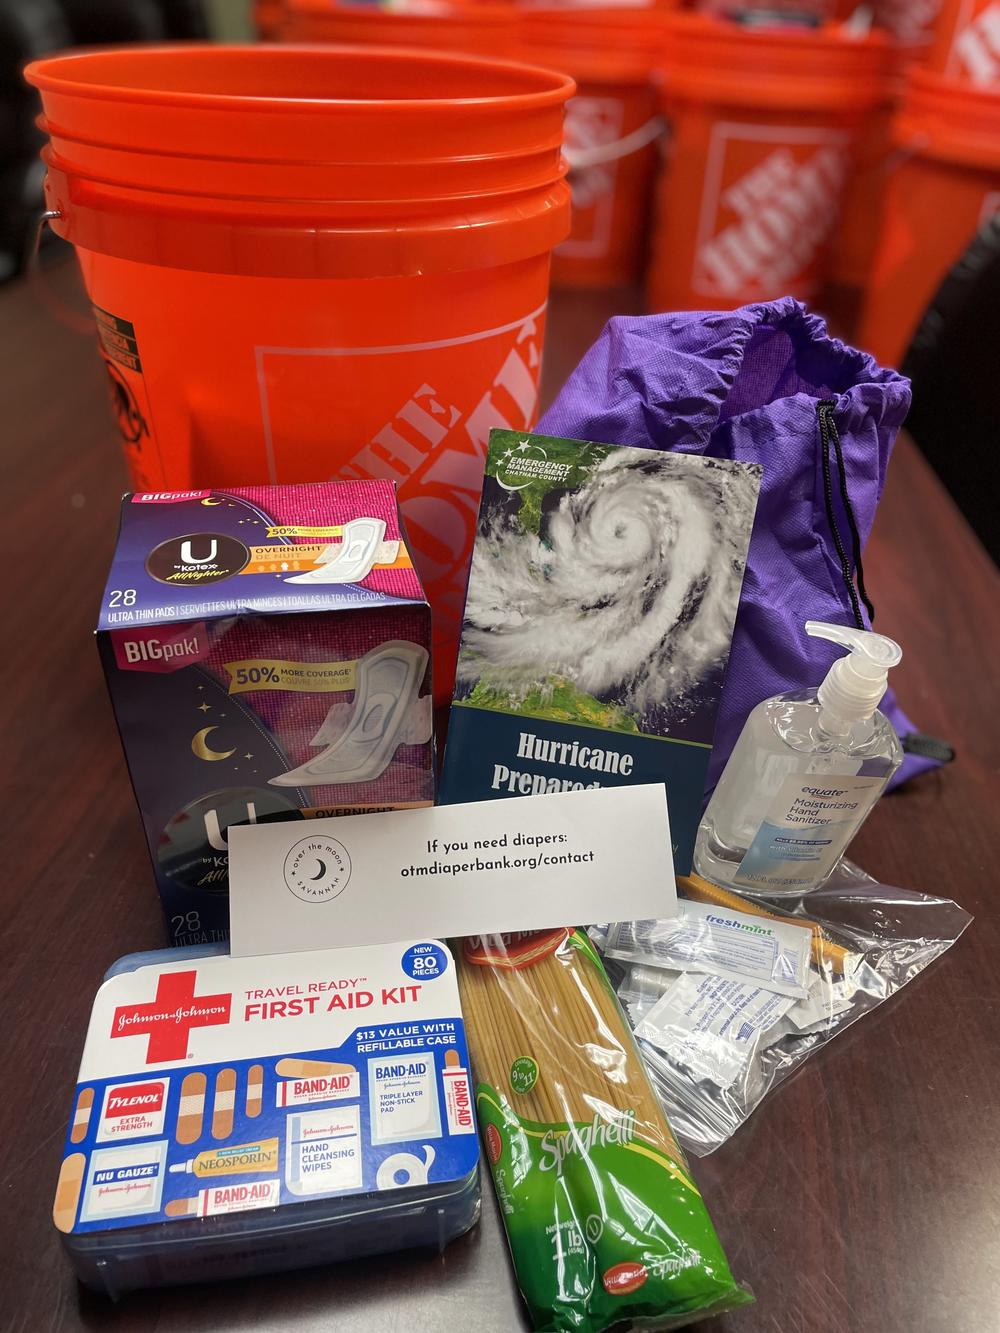 The Partnership for Southern Equity partnered with local organizations to assemble and distribute hurricane preparedness kits to historically disenfranchised communities in coastal Georgia. Credit: The Partnership for Southern Equity.